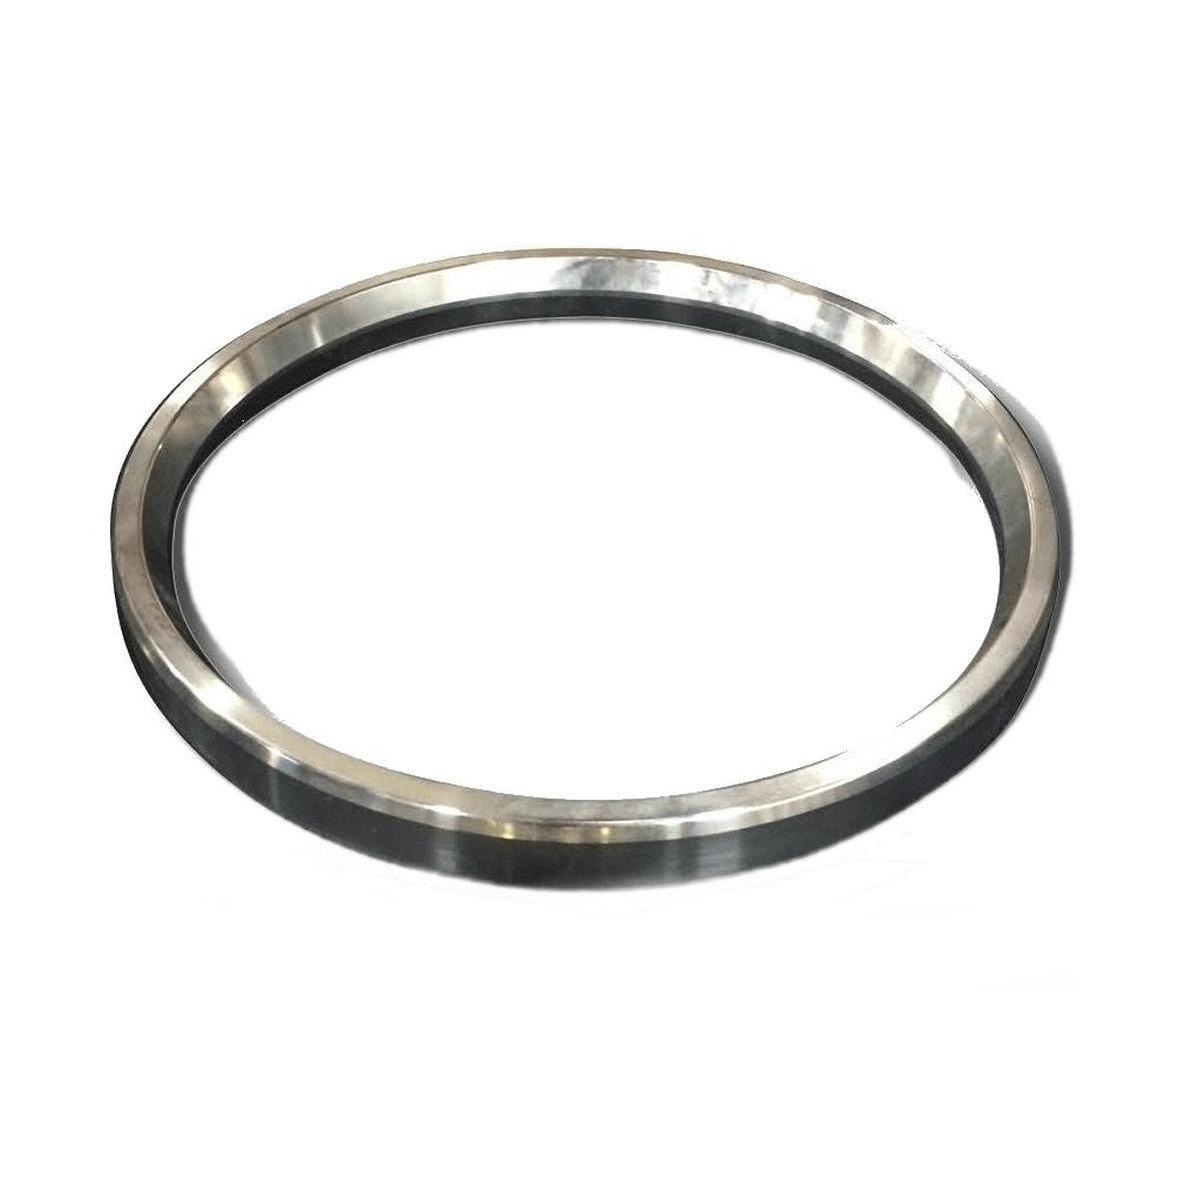 G7020 - Ring Joint Gasket